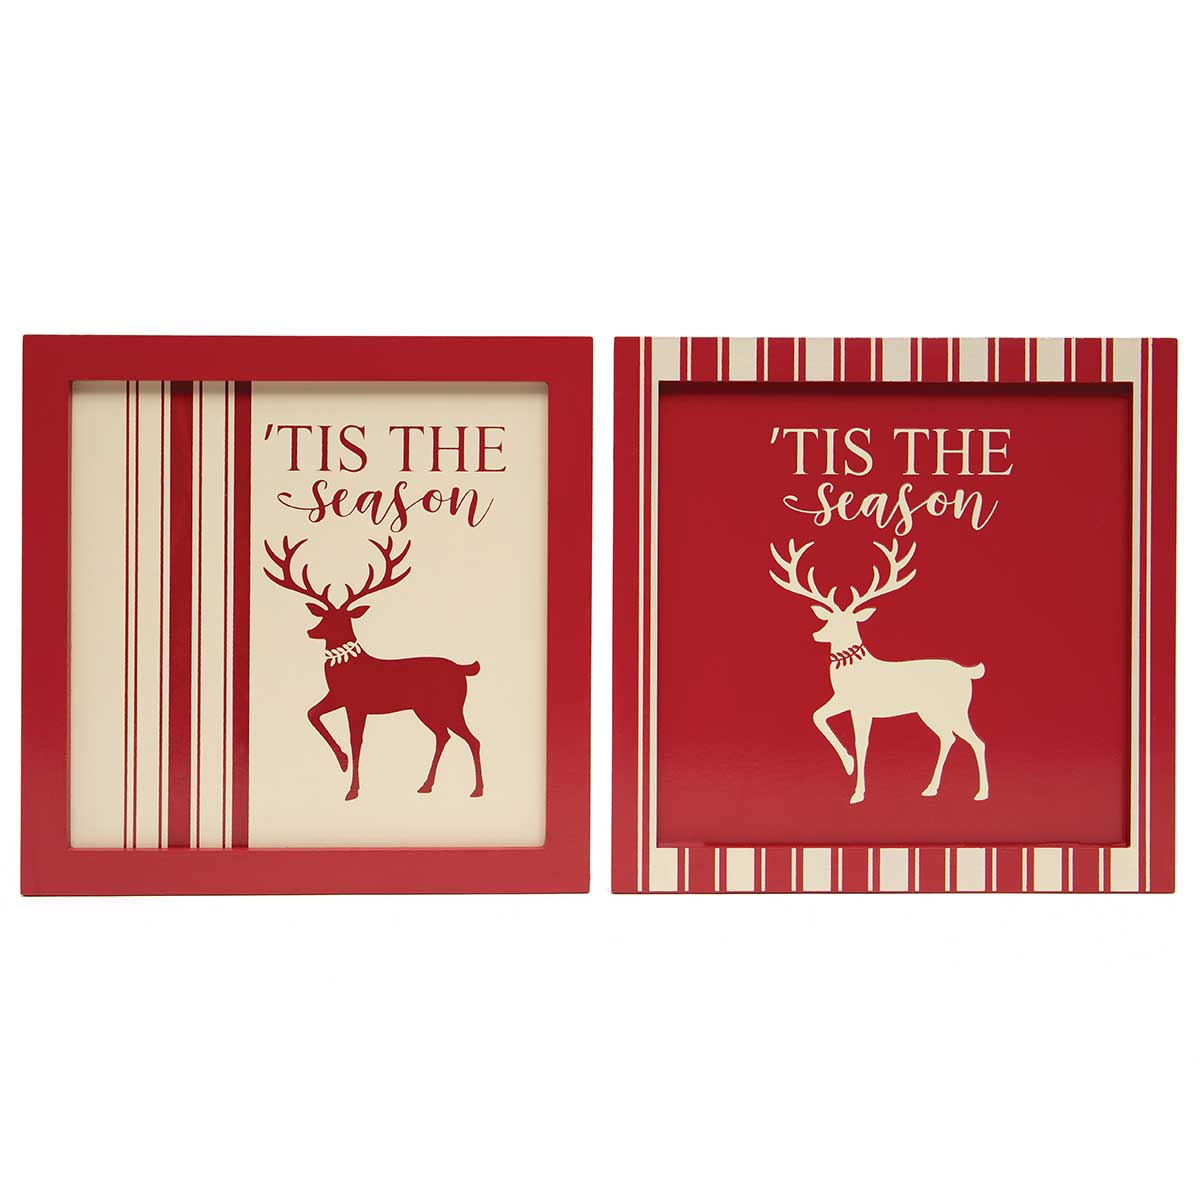 Ticking Tis the Season Square Wood Sign Red/Cream with Reindee